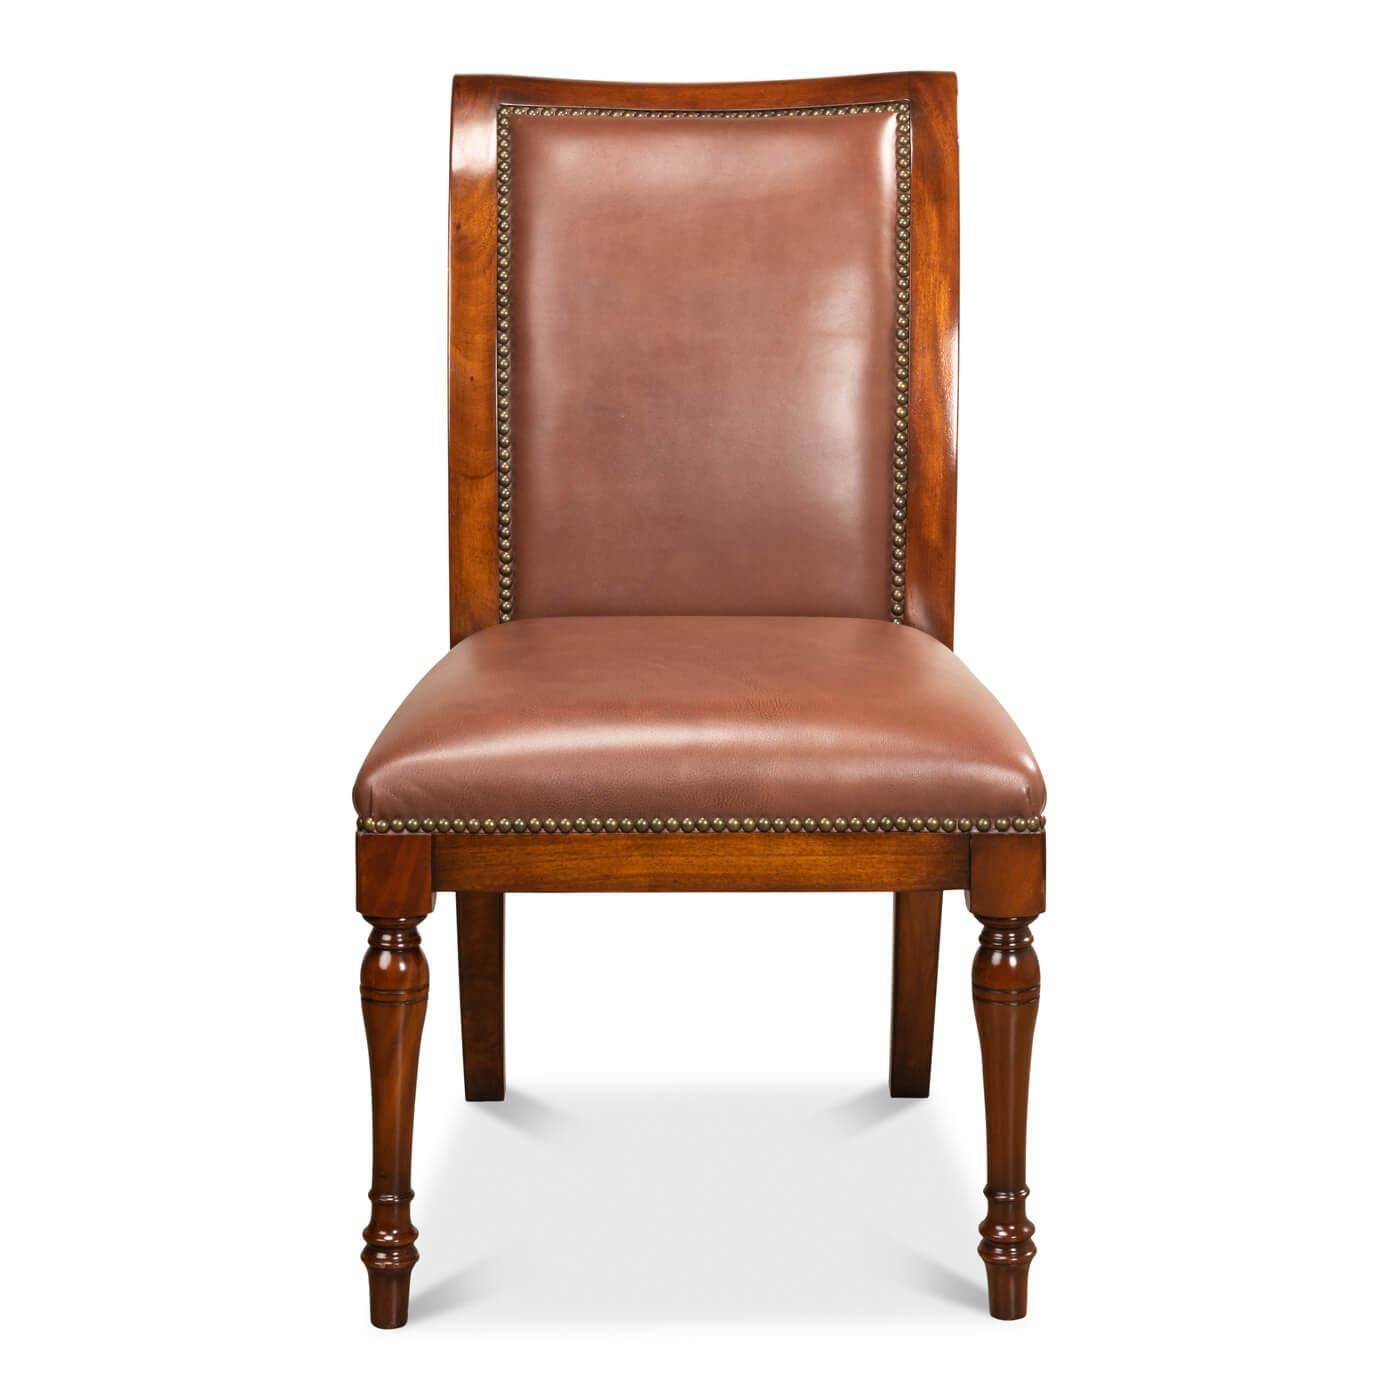 A French Directoire style leather dining chair upholstered with brown leather to the seat and back, in a warm walnut finish, supported on slender turned tapering legs, and finished with brass nailhead trim.

Dimensions: 21